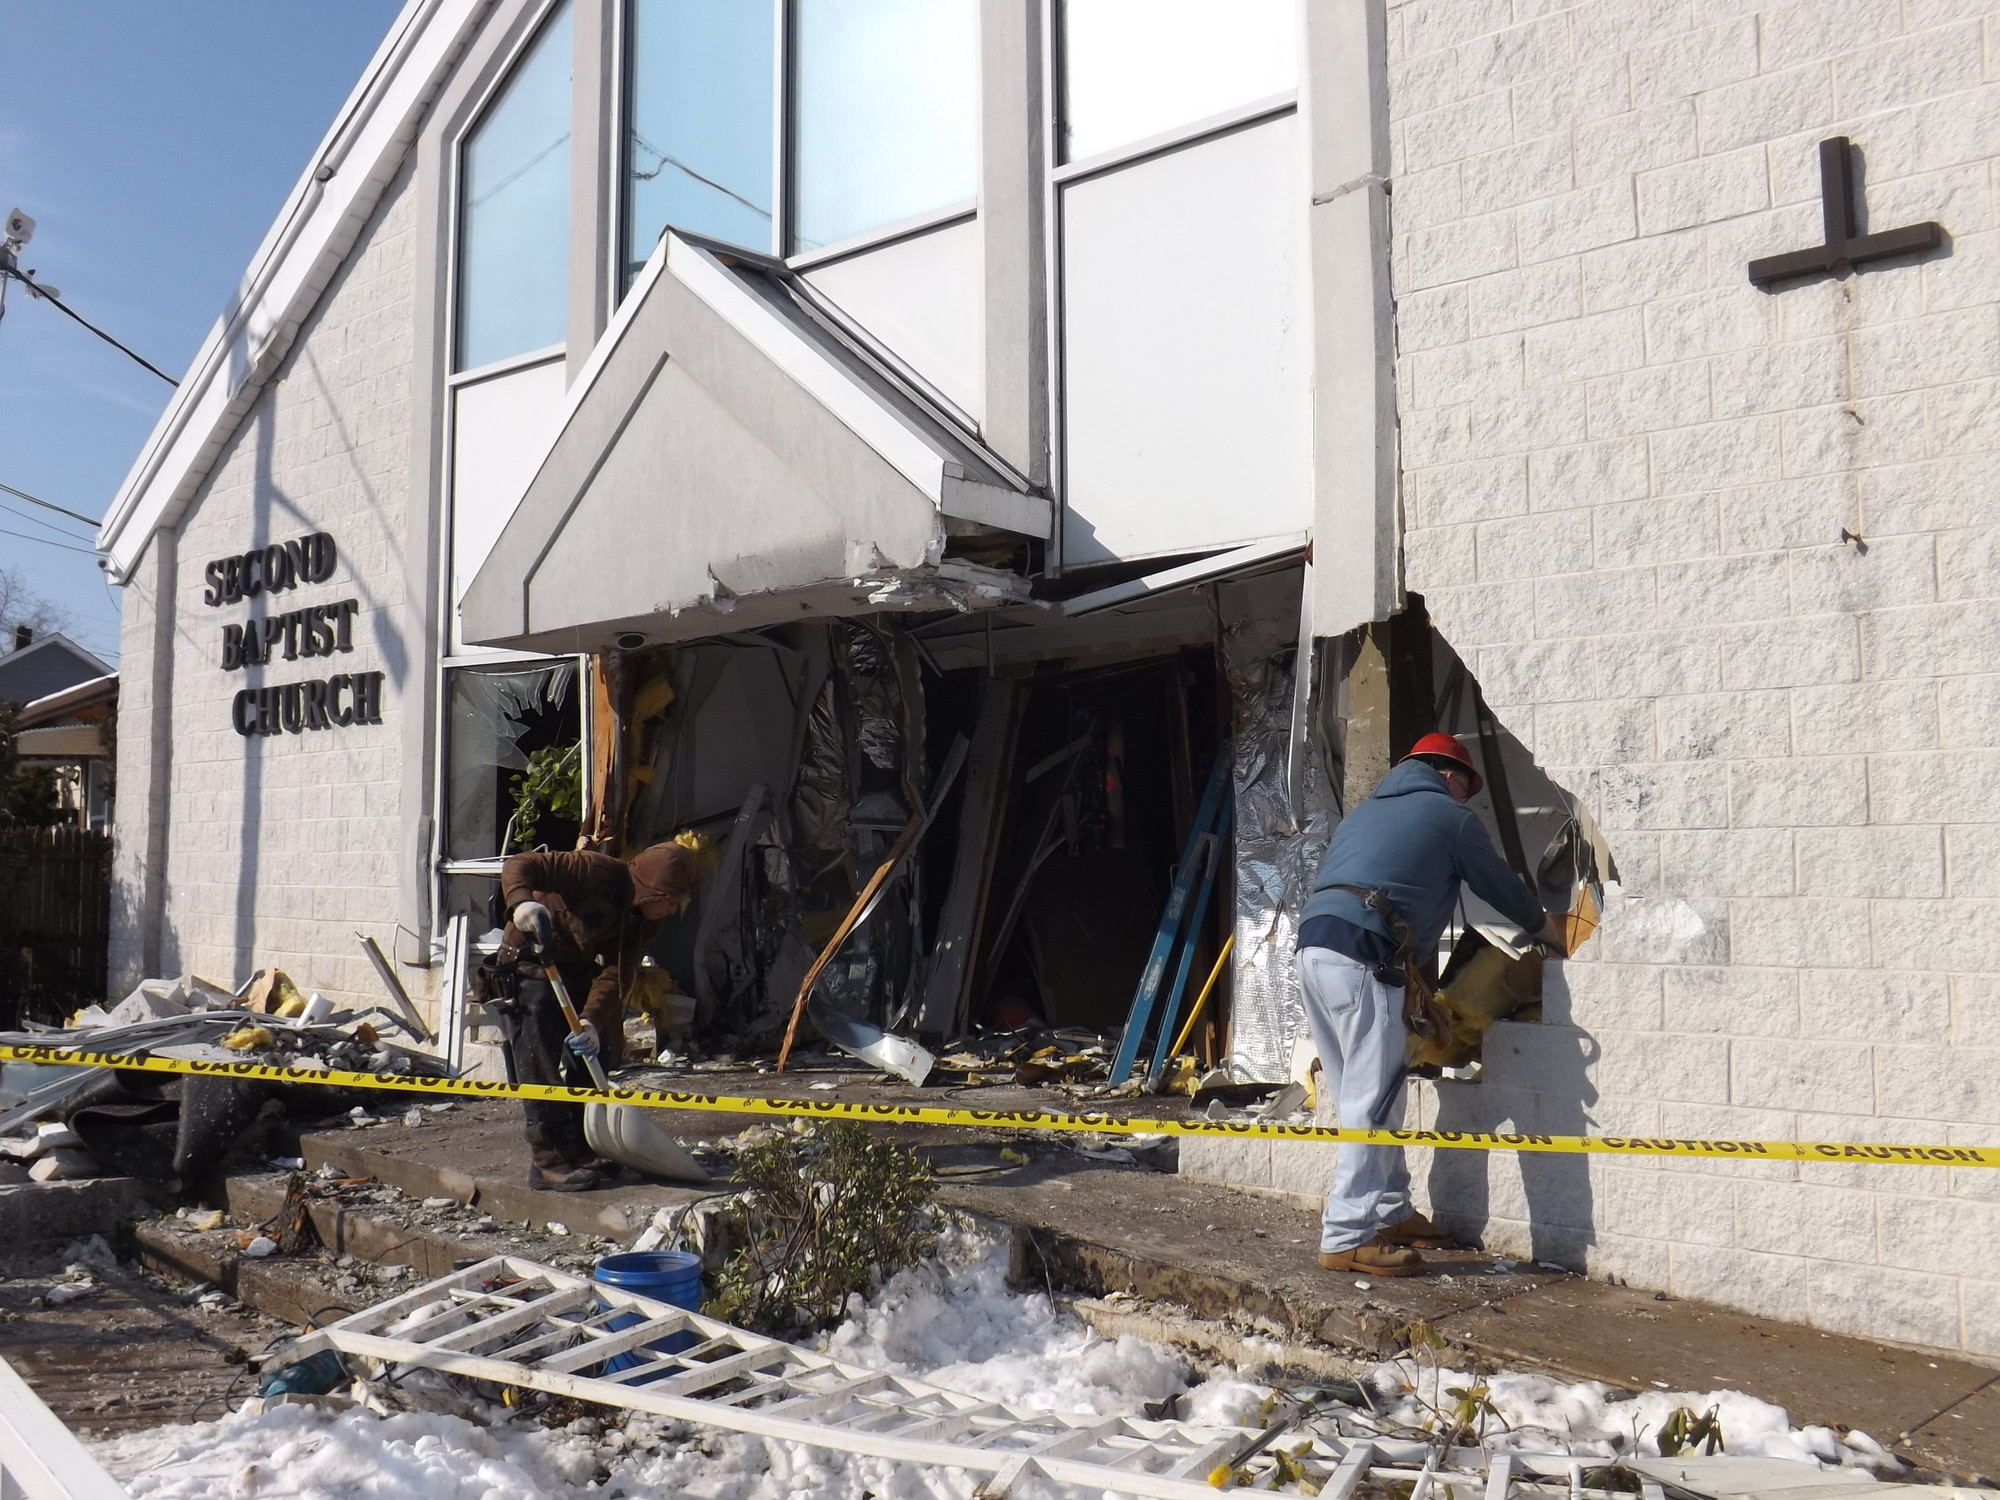 A car crashed into Second Baptist Church at 4:25 a.m. on Sunday.